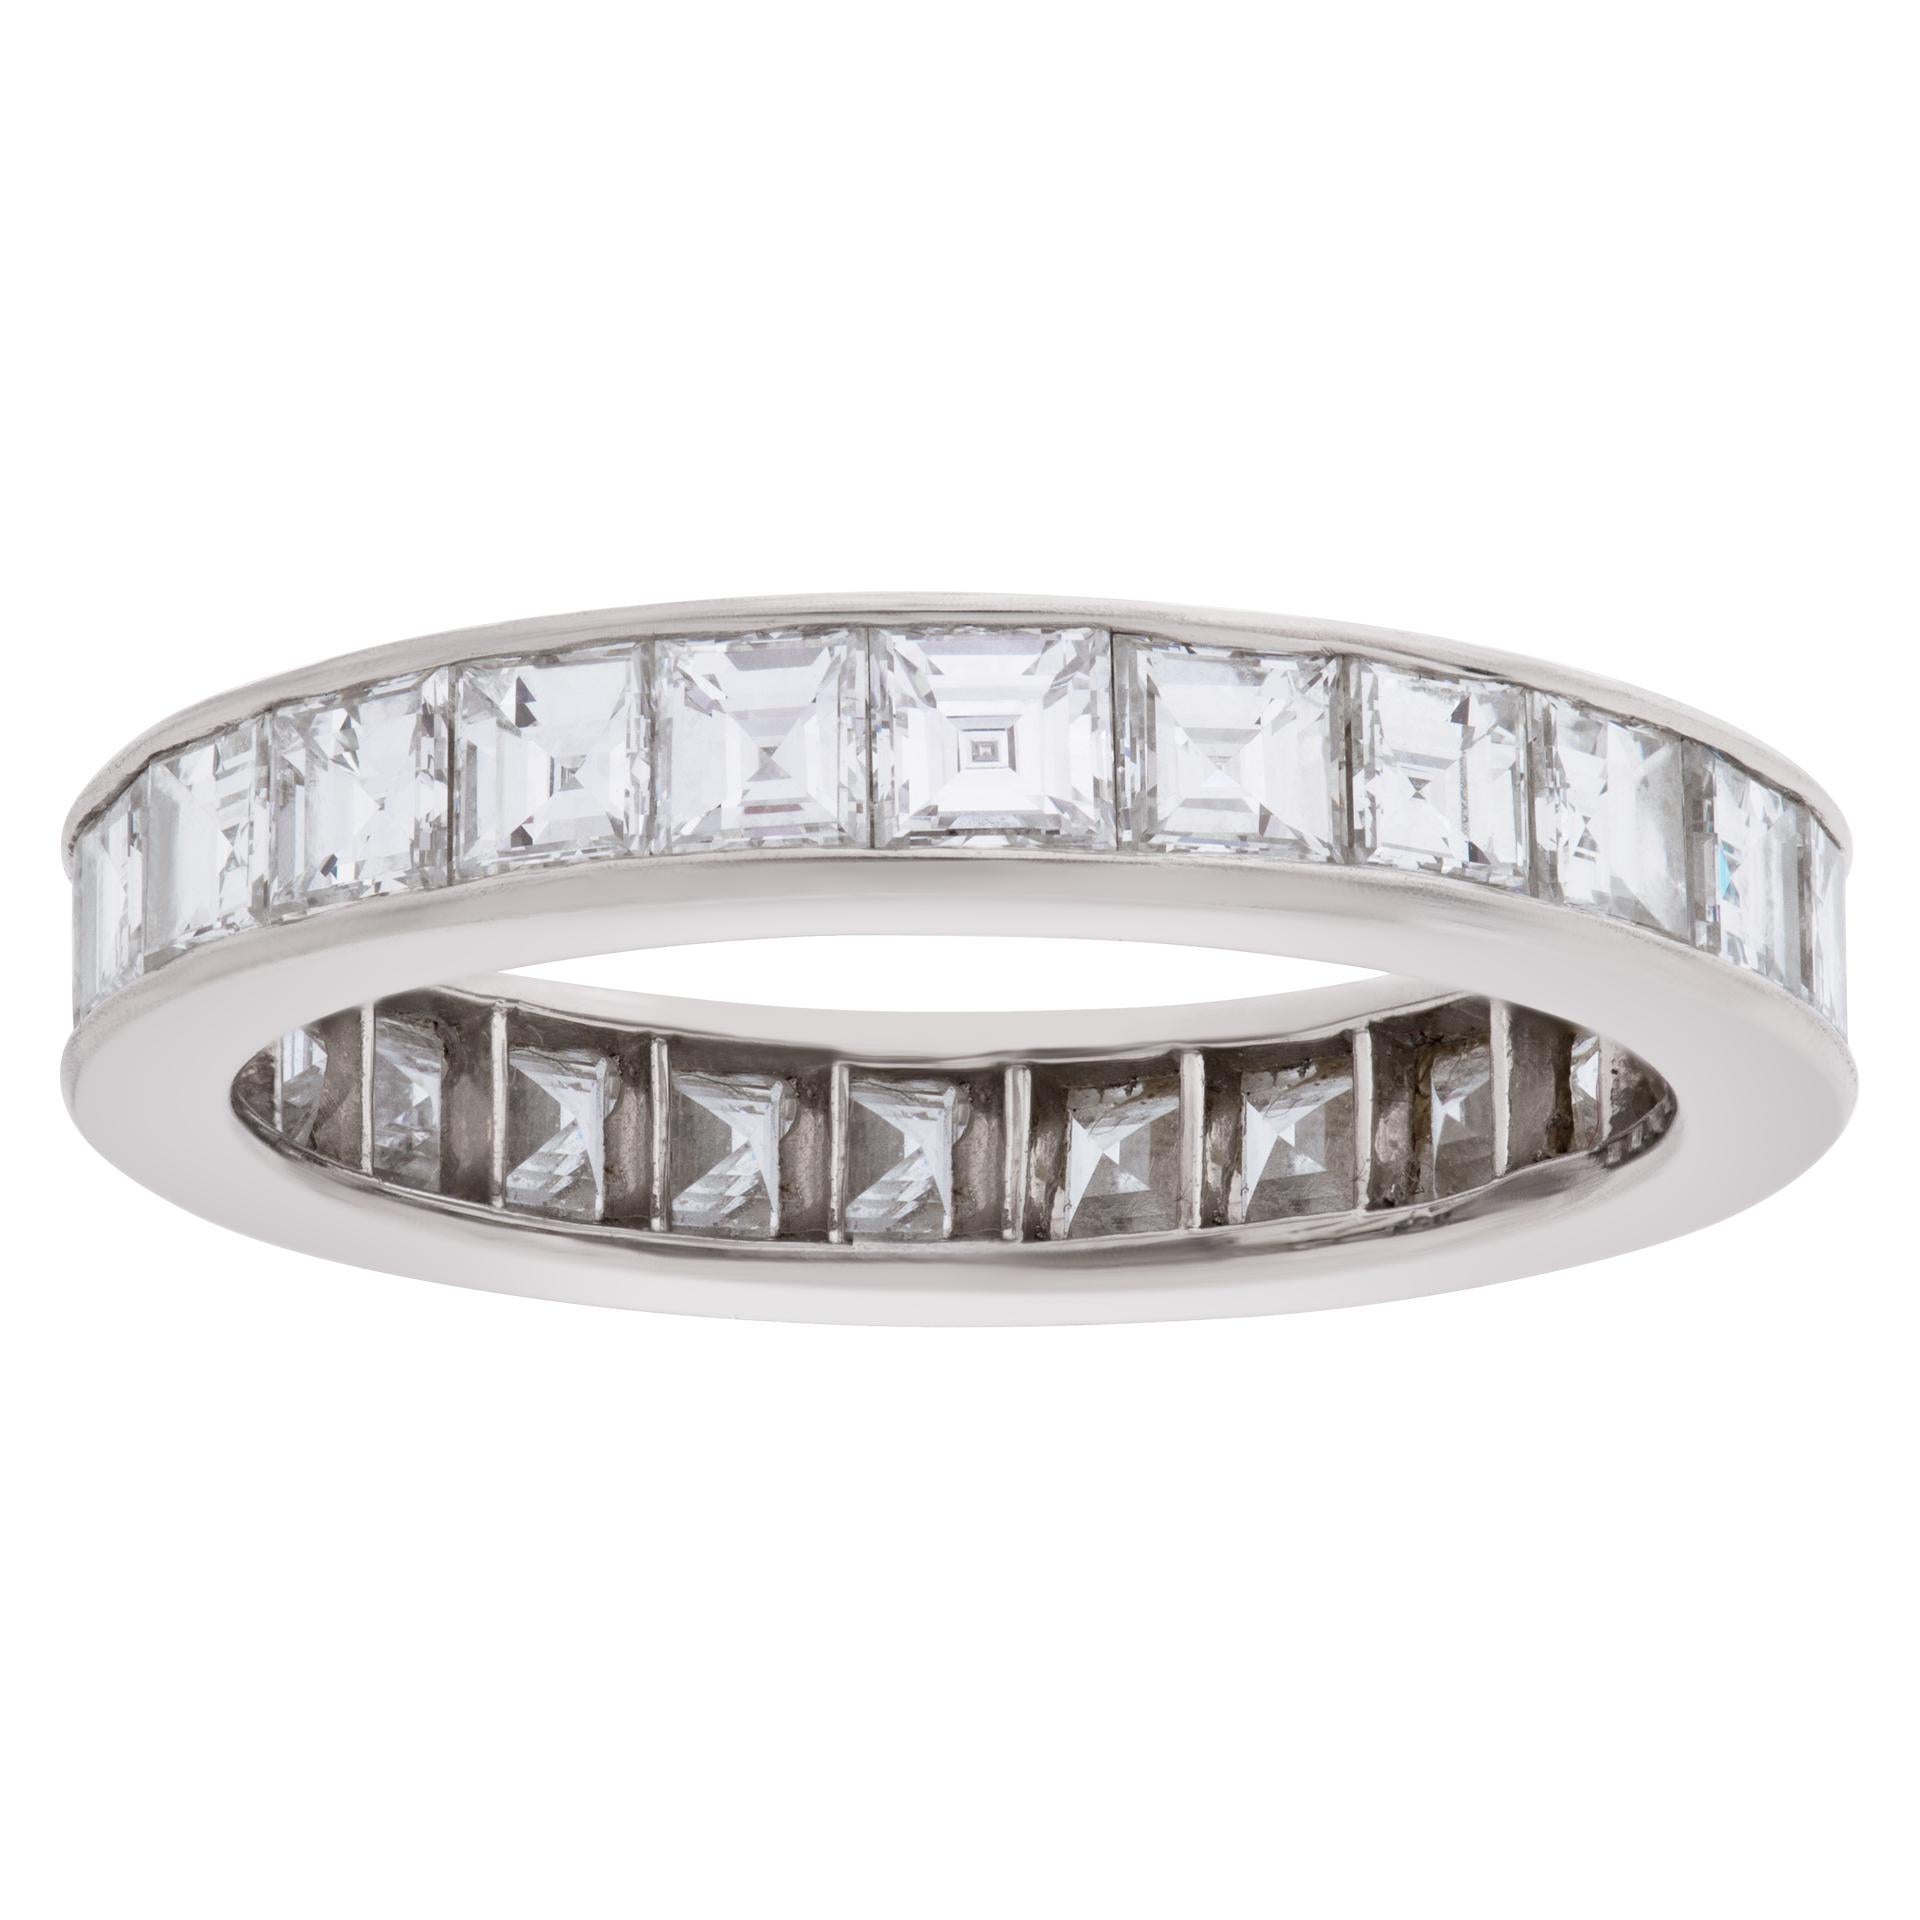 Platinum eternity band with approximately 3.12 carats in princess cut G-H color, VS-SI clarity diamonds. Size 6.5.

This Diamond ring is currently size 6.5 and some items can be sized up or down, please ask! It weighs 2.3 pennyweights and is